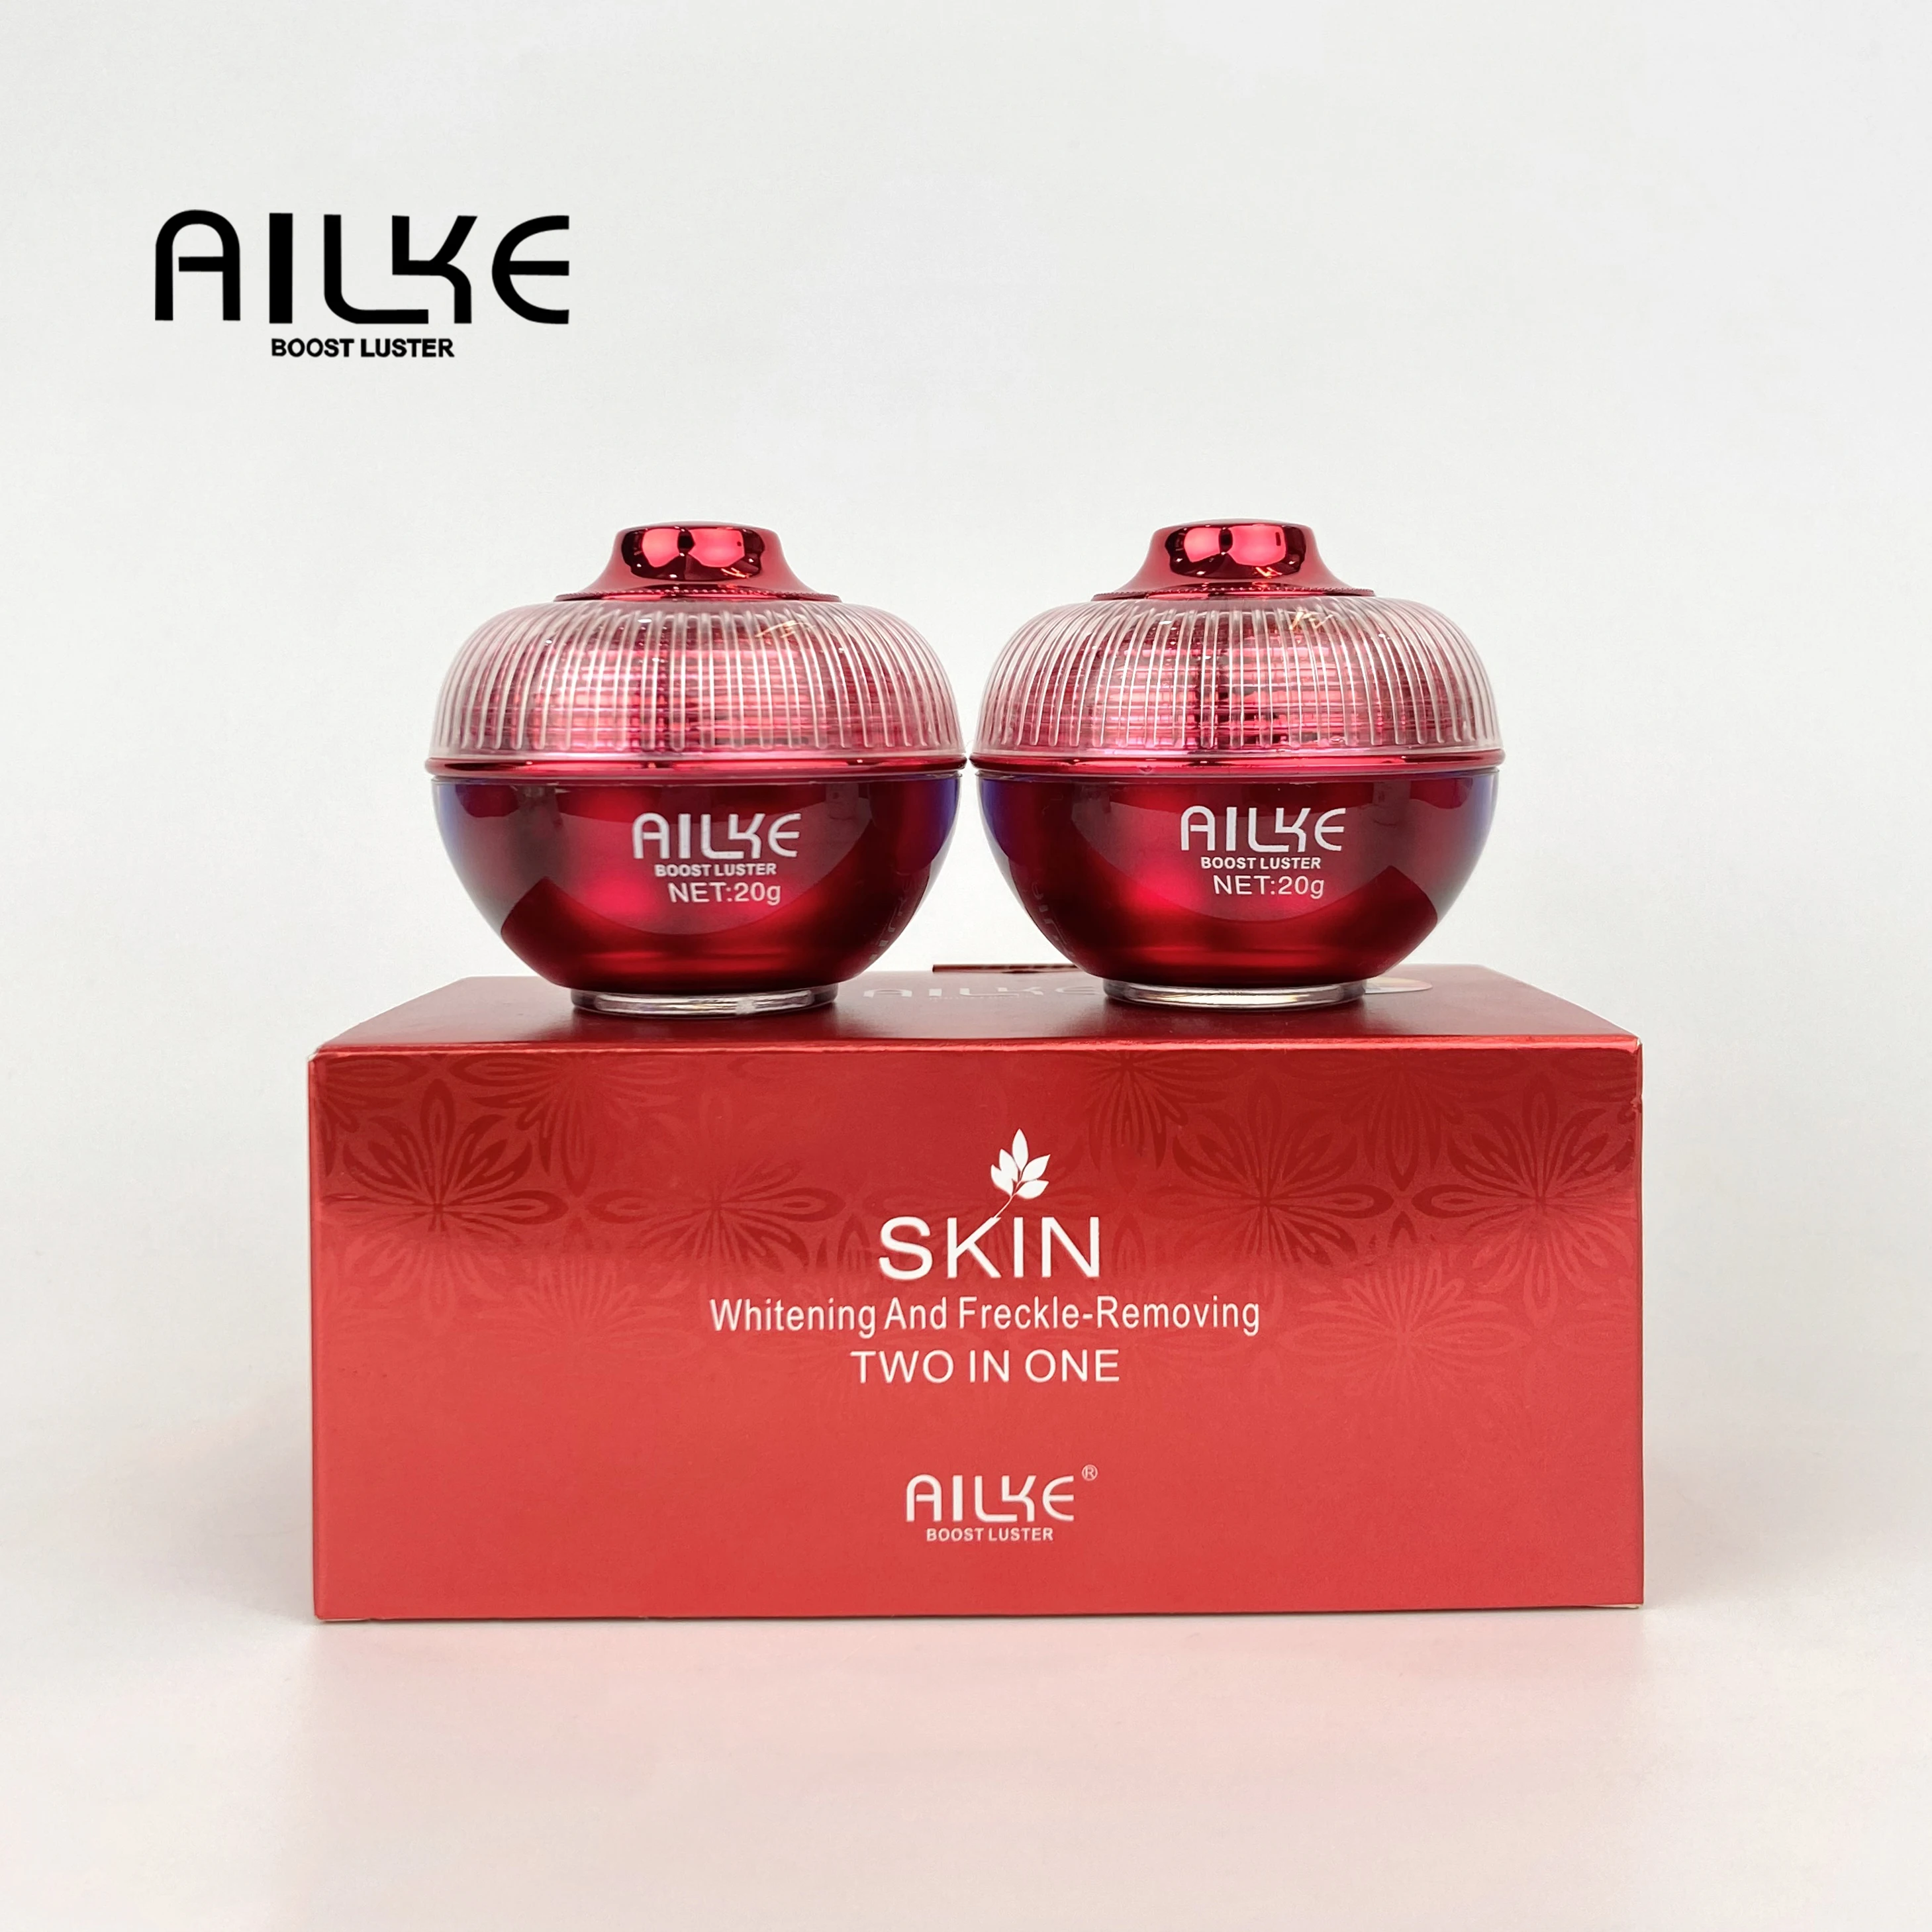 

Ailke 2 in 1 set 7 Days Black Spots and Freckle Removal Glowing Look Face Whitening Cream Day Night Cream, Day cream:white/night cream:yellow